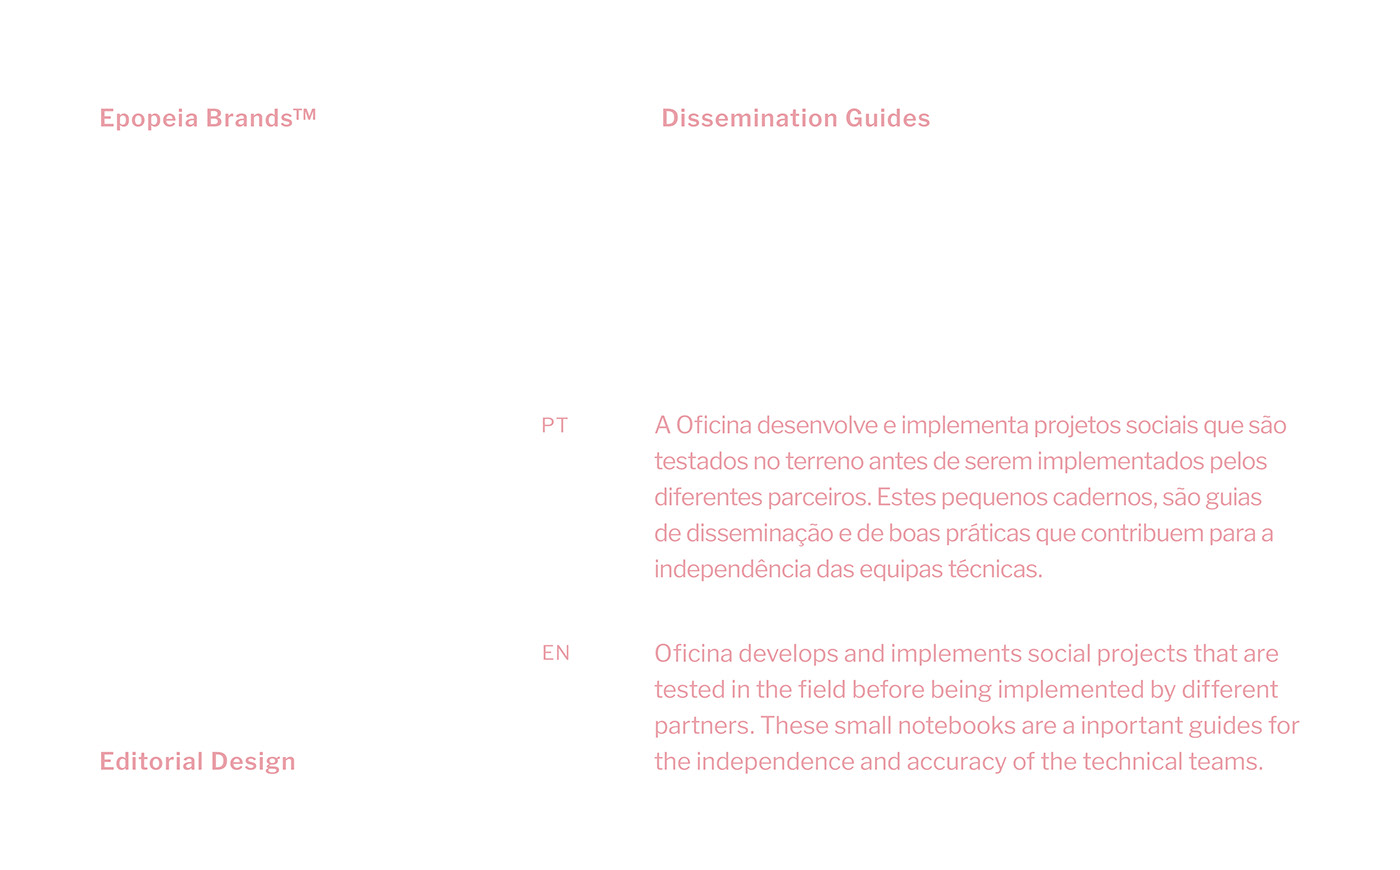 Dissemination Guides